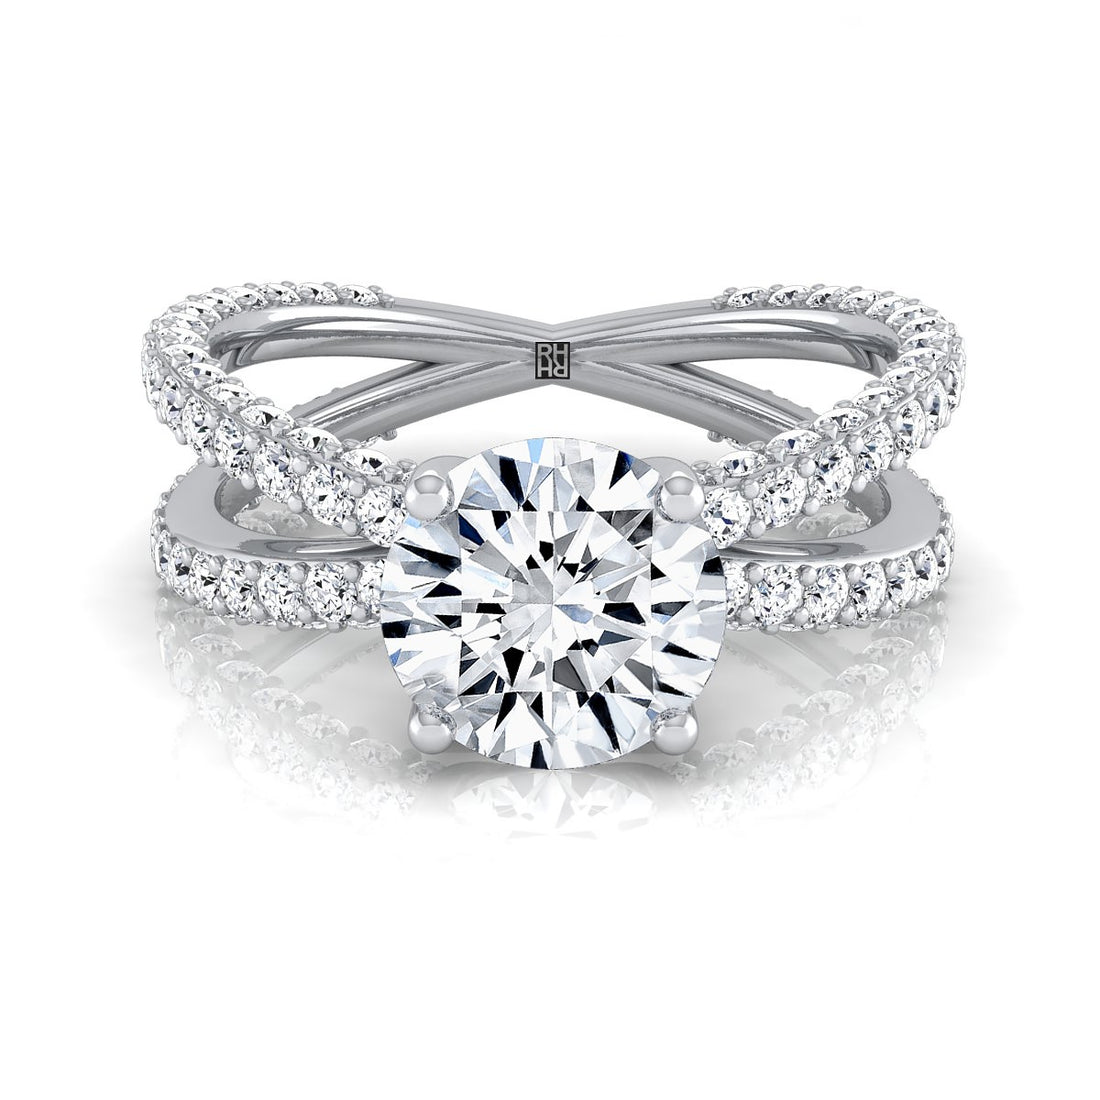 Common Misconceptions about Diamond Ring Shopping